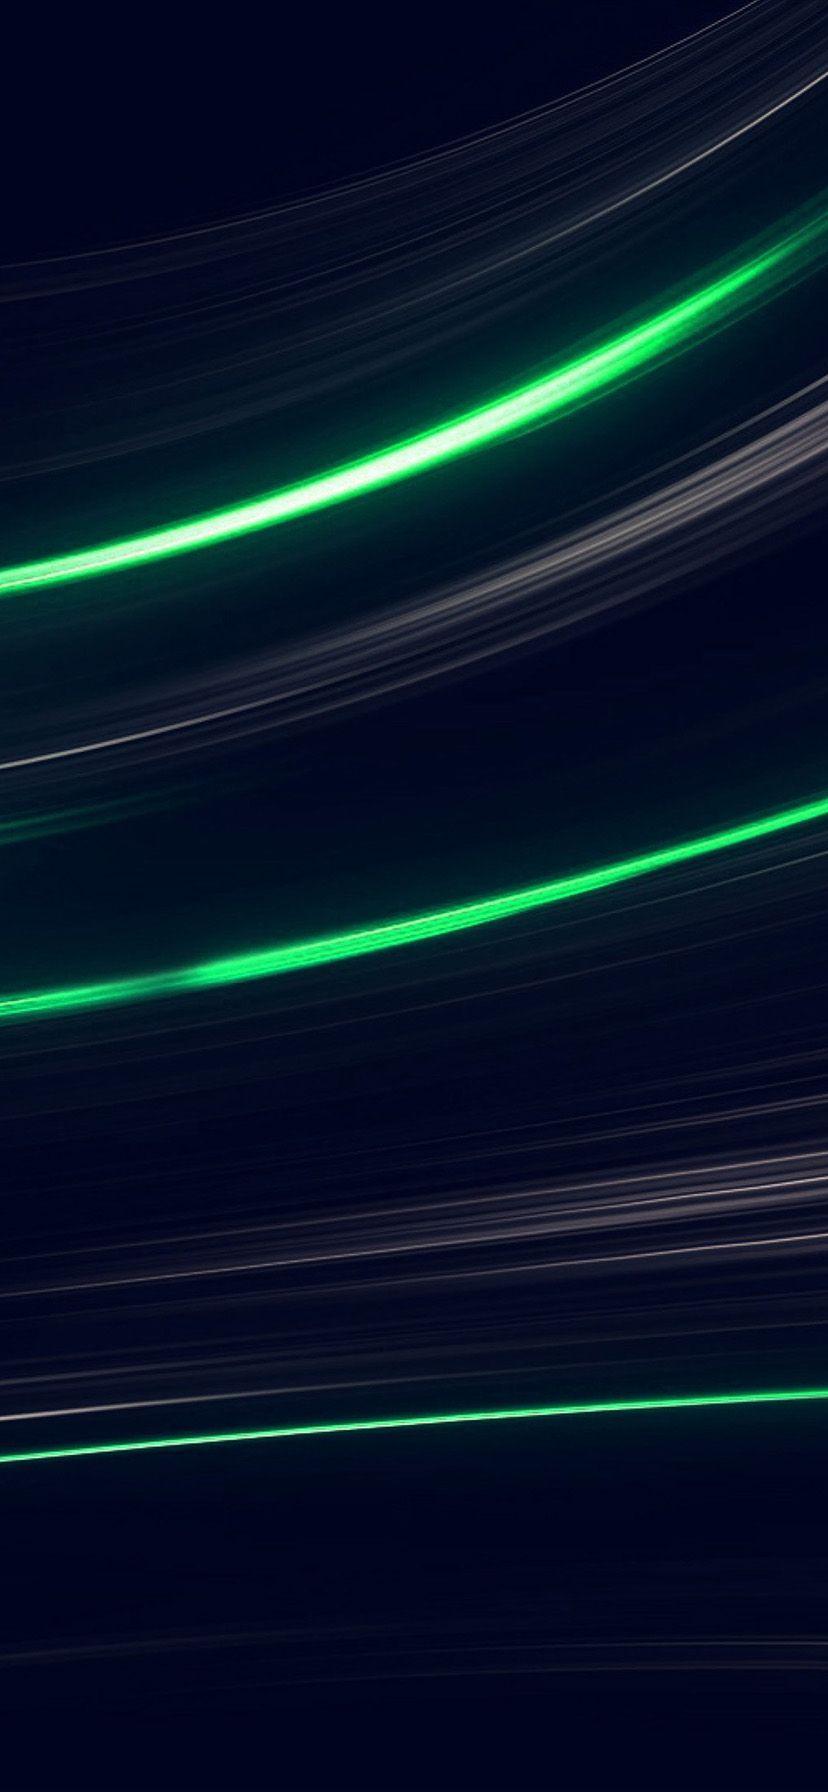 Iphone Xr Wallpapers For Curve Abstract Line Dark Green